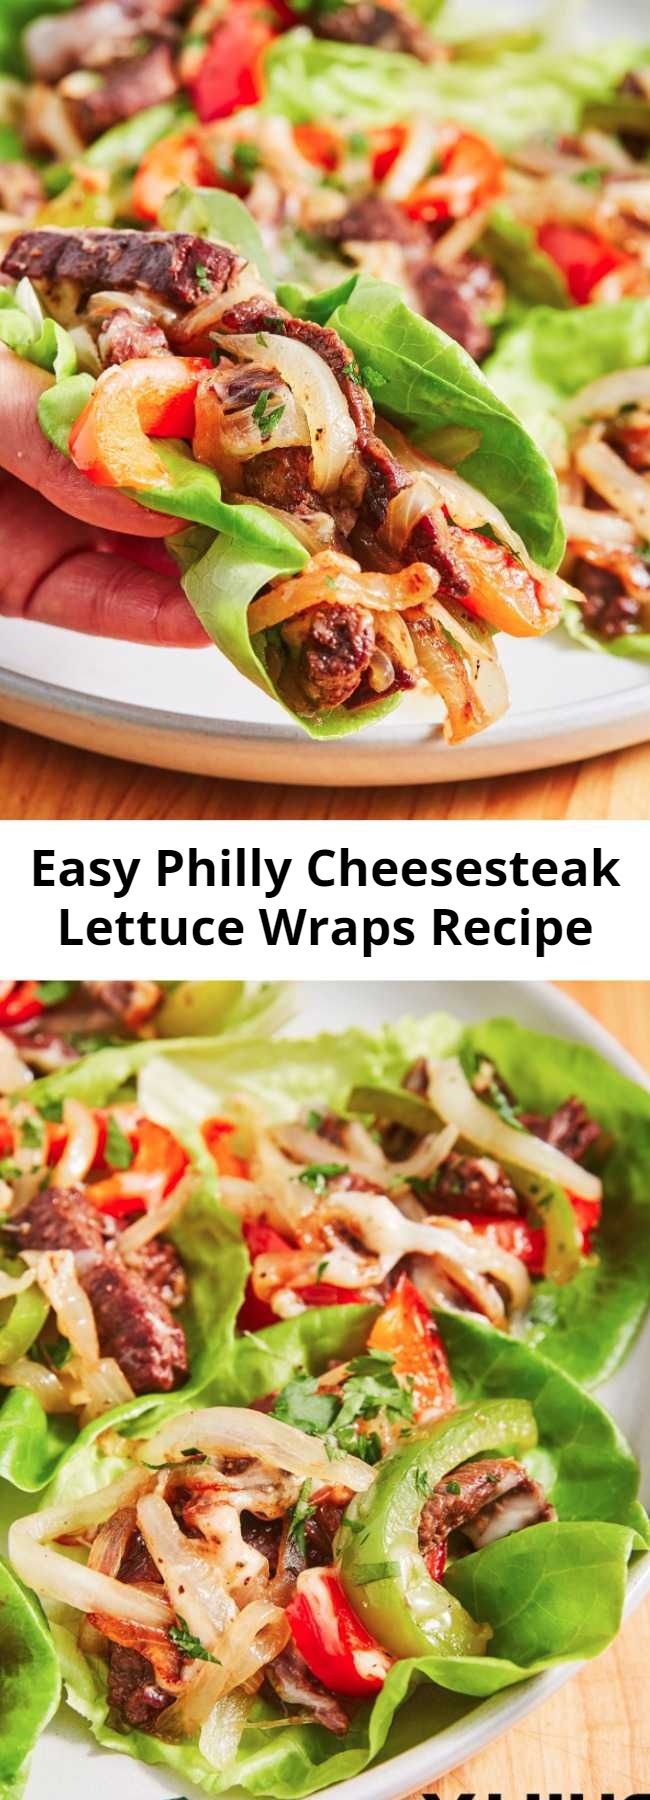 Easy Philly Cheesesteak Lettuce Wraps Recipe - You won't miss the hoagie in these low-carb Philly Cheesesteak lettuce wraps. Make your favorite sandwich without the carbs. #food #healthyeating #gf #glutenfree #easyrecipe